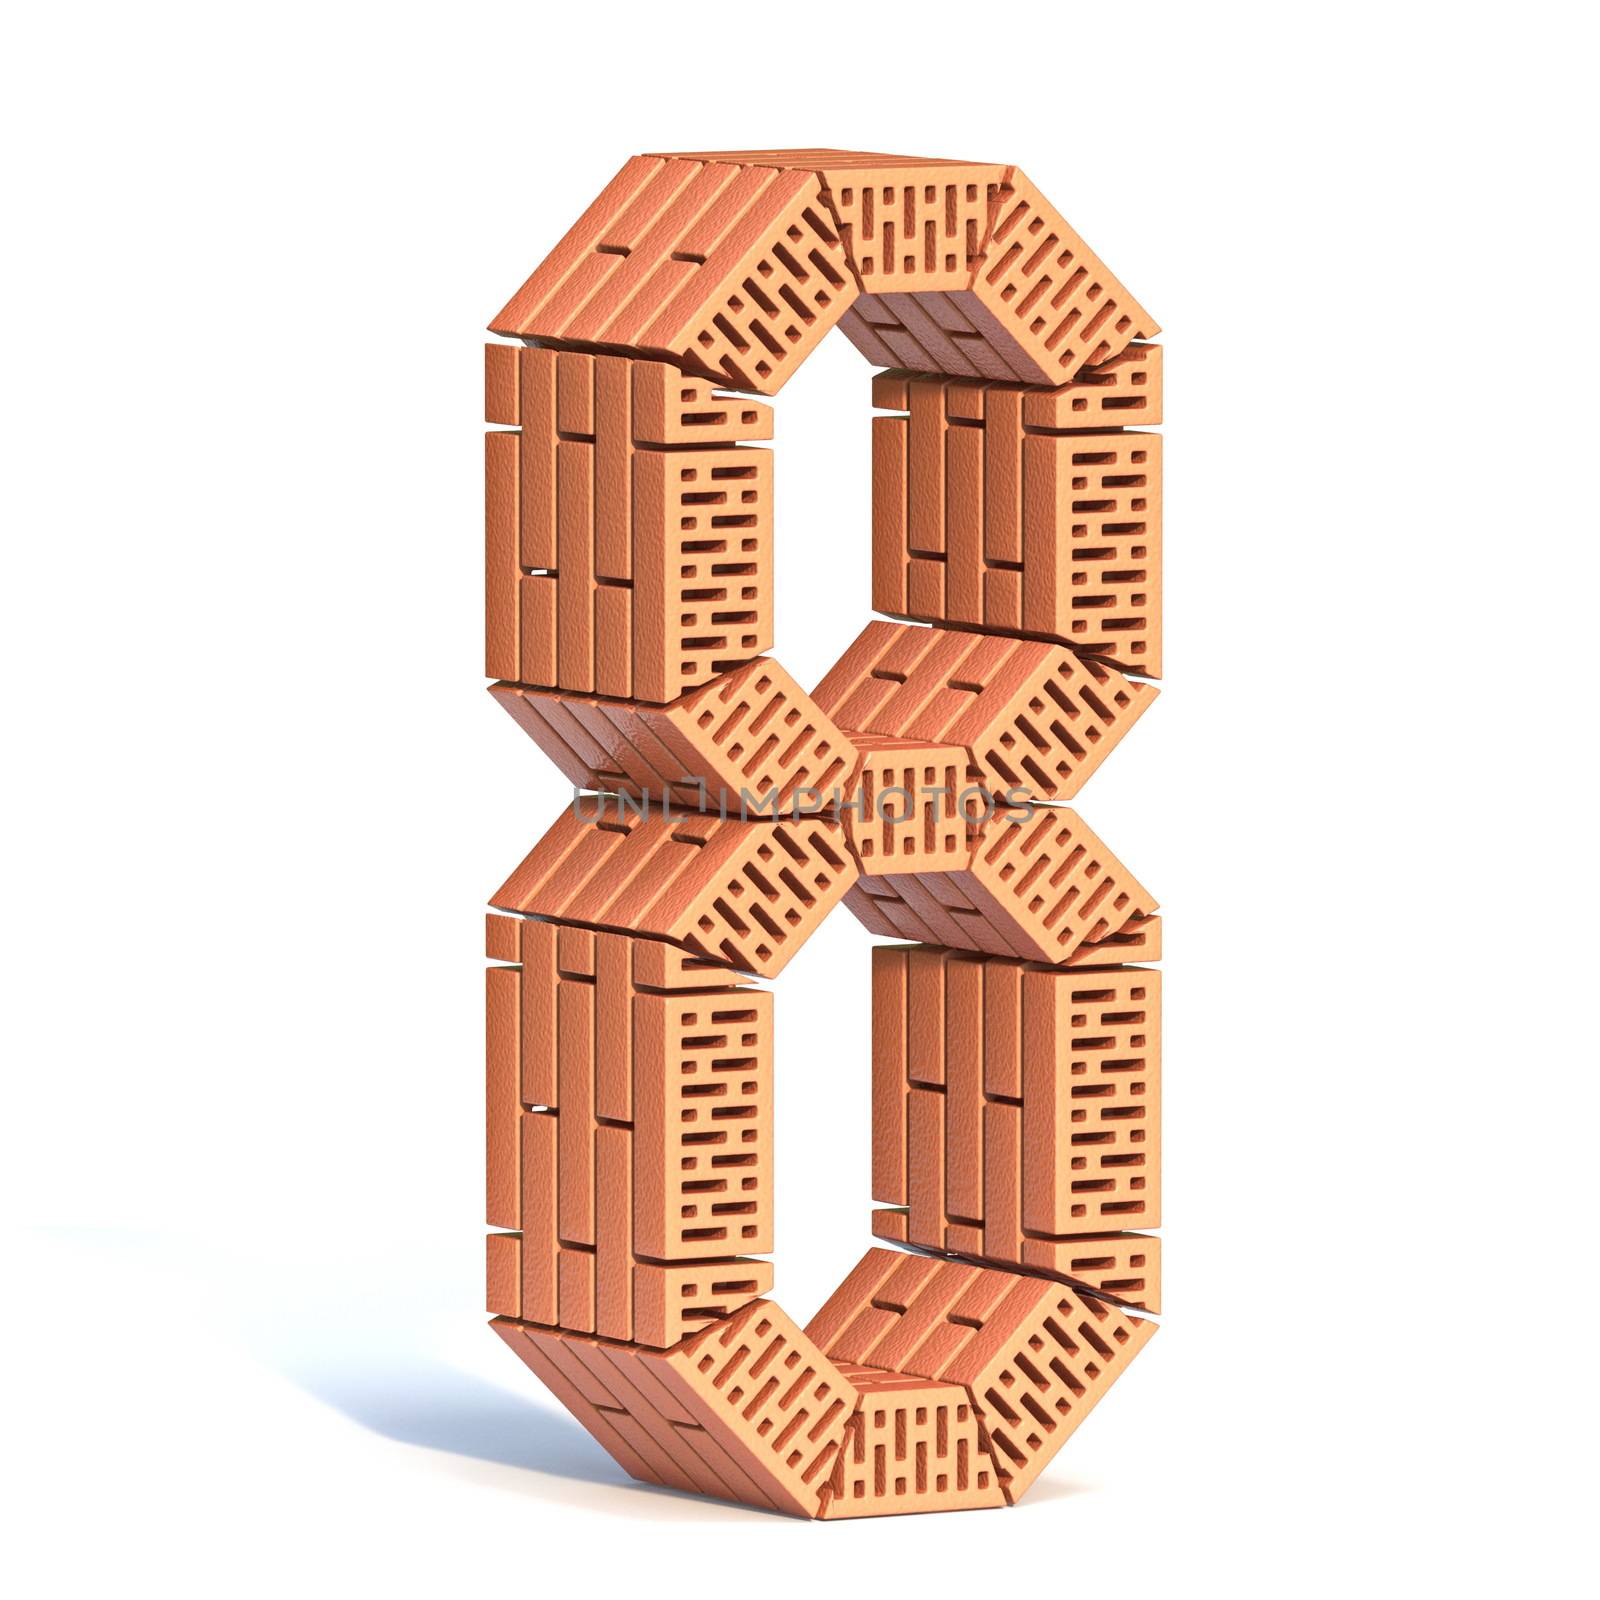 Brick wall font Number 8 EIGHT 3D render illustration isolated on white background